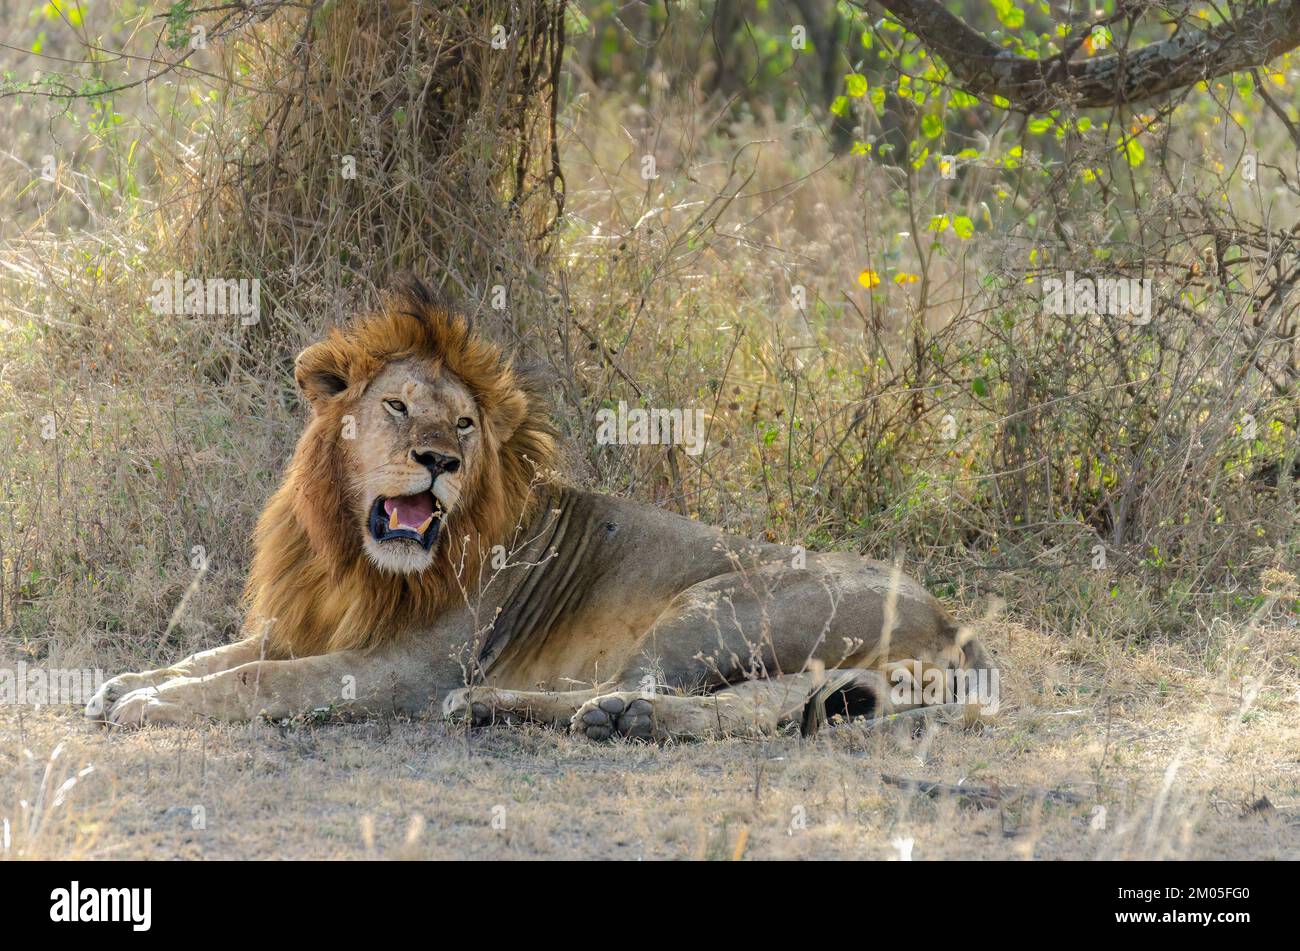 IMAGE OF A GOOD SIZE MALE LION WITH GOLDEN HAIR, TAKEN IN SERENGETI, IN THE AREA OF SERONERA, AT SUNSET, AFTER A WHOLE DAY OF SEARCHING WITHOUT SUCCES. Stock Photo